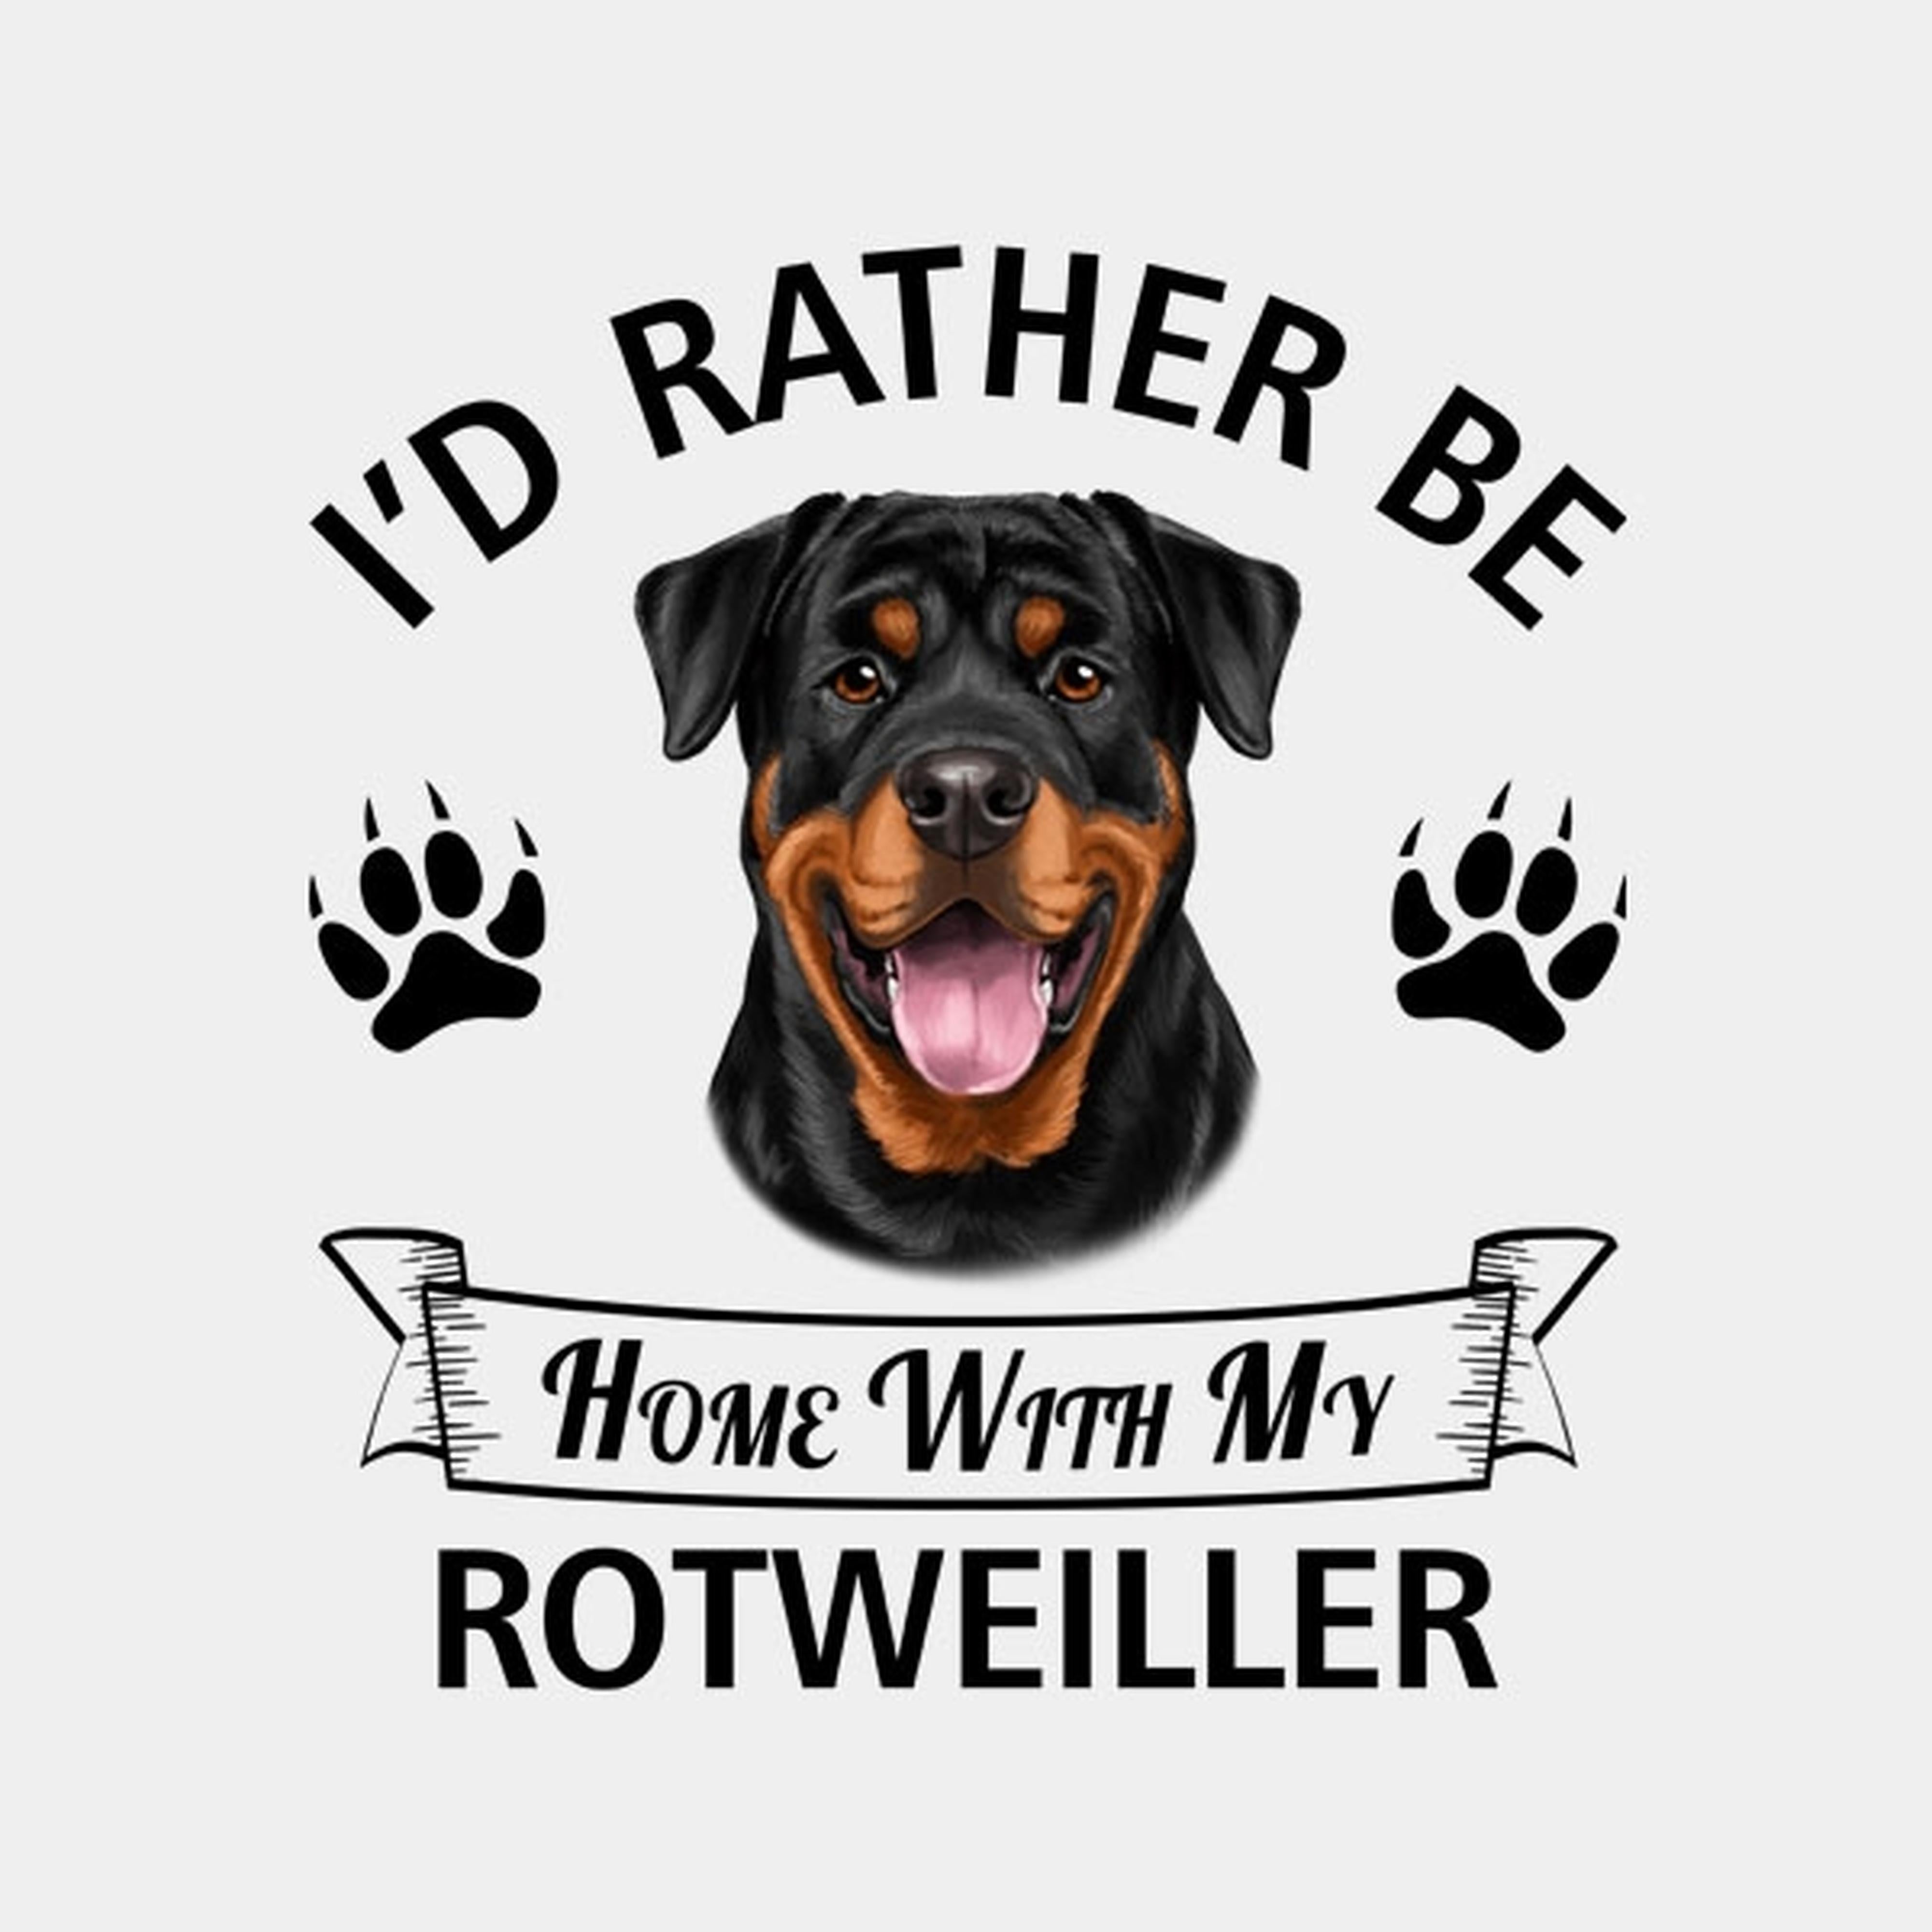 I'd rather stay home with my Rotweiller - T-shirt